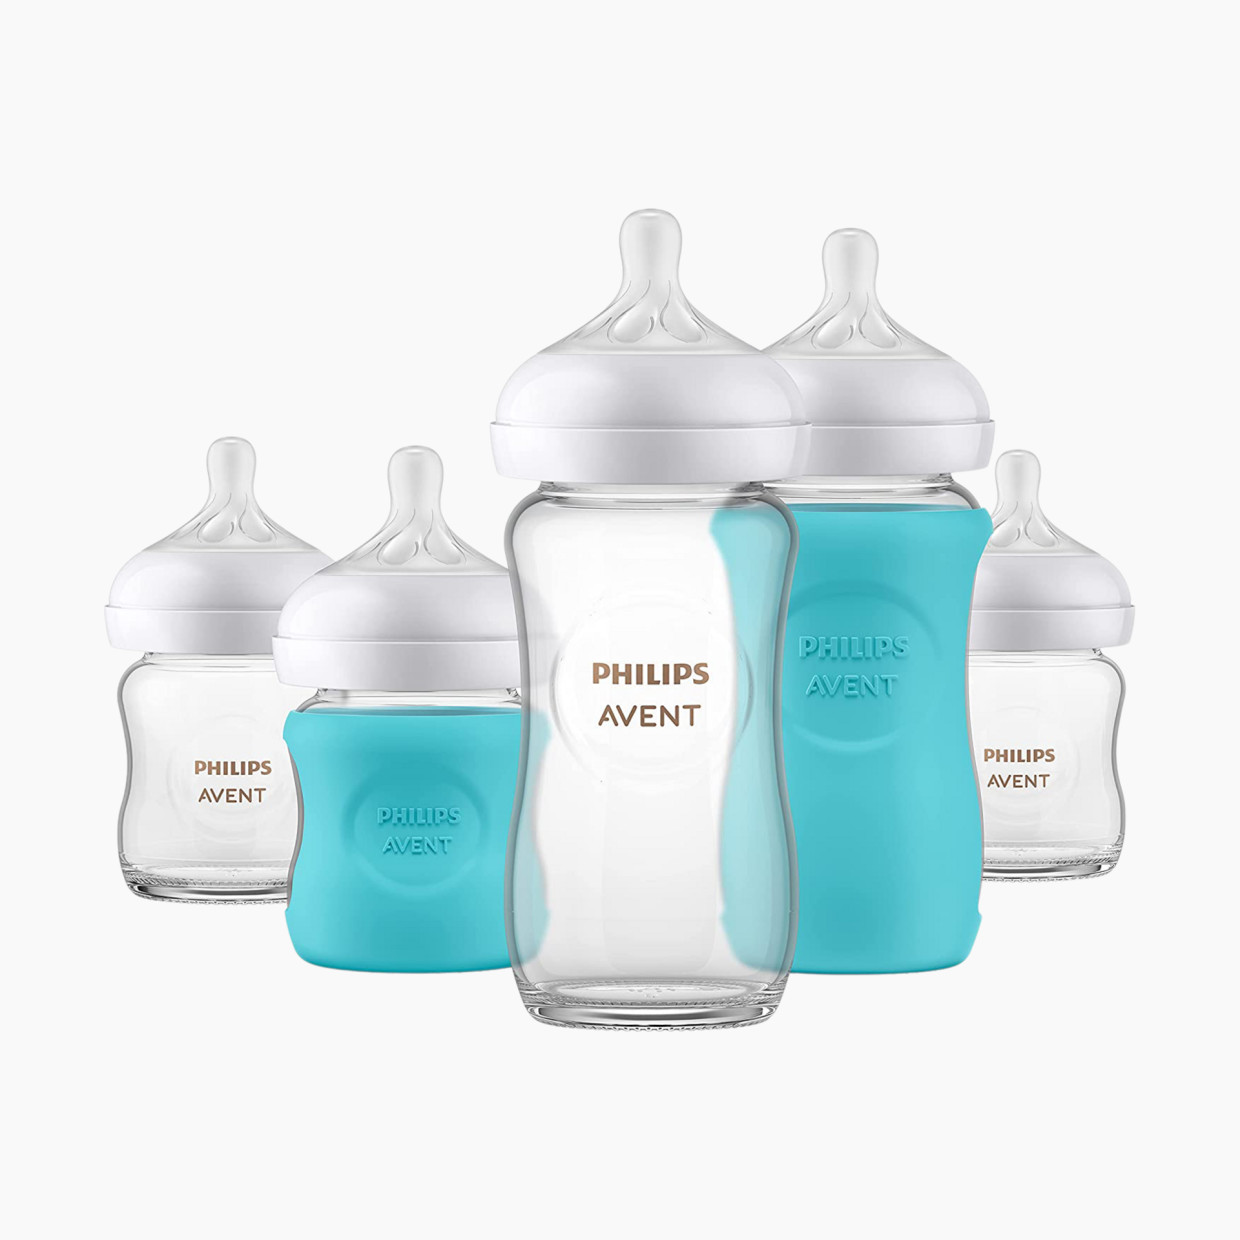 Philips Avent Avent Glass Natural Bottle Baby Set.